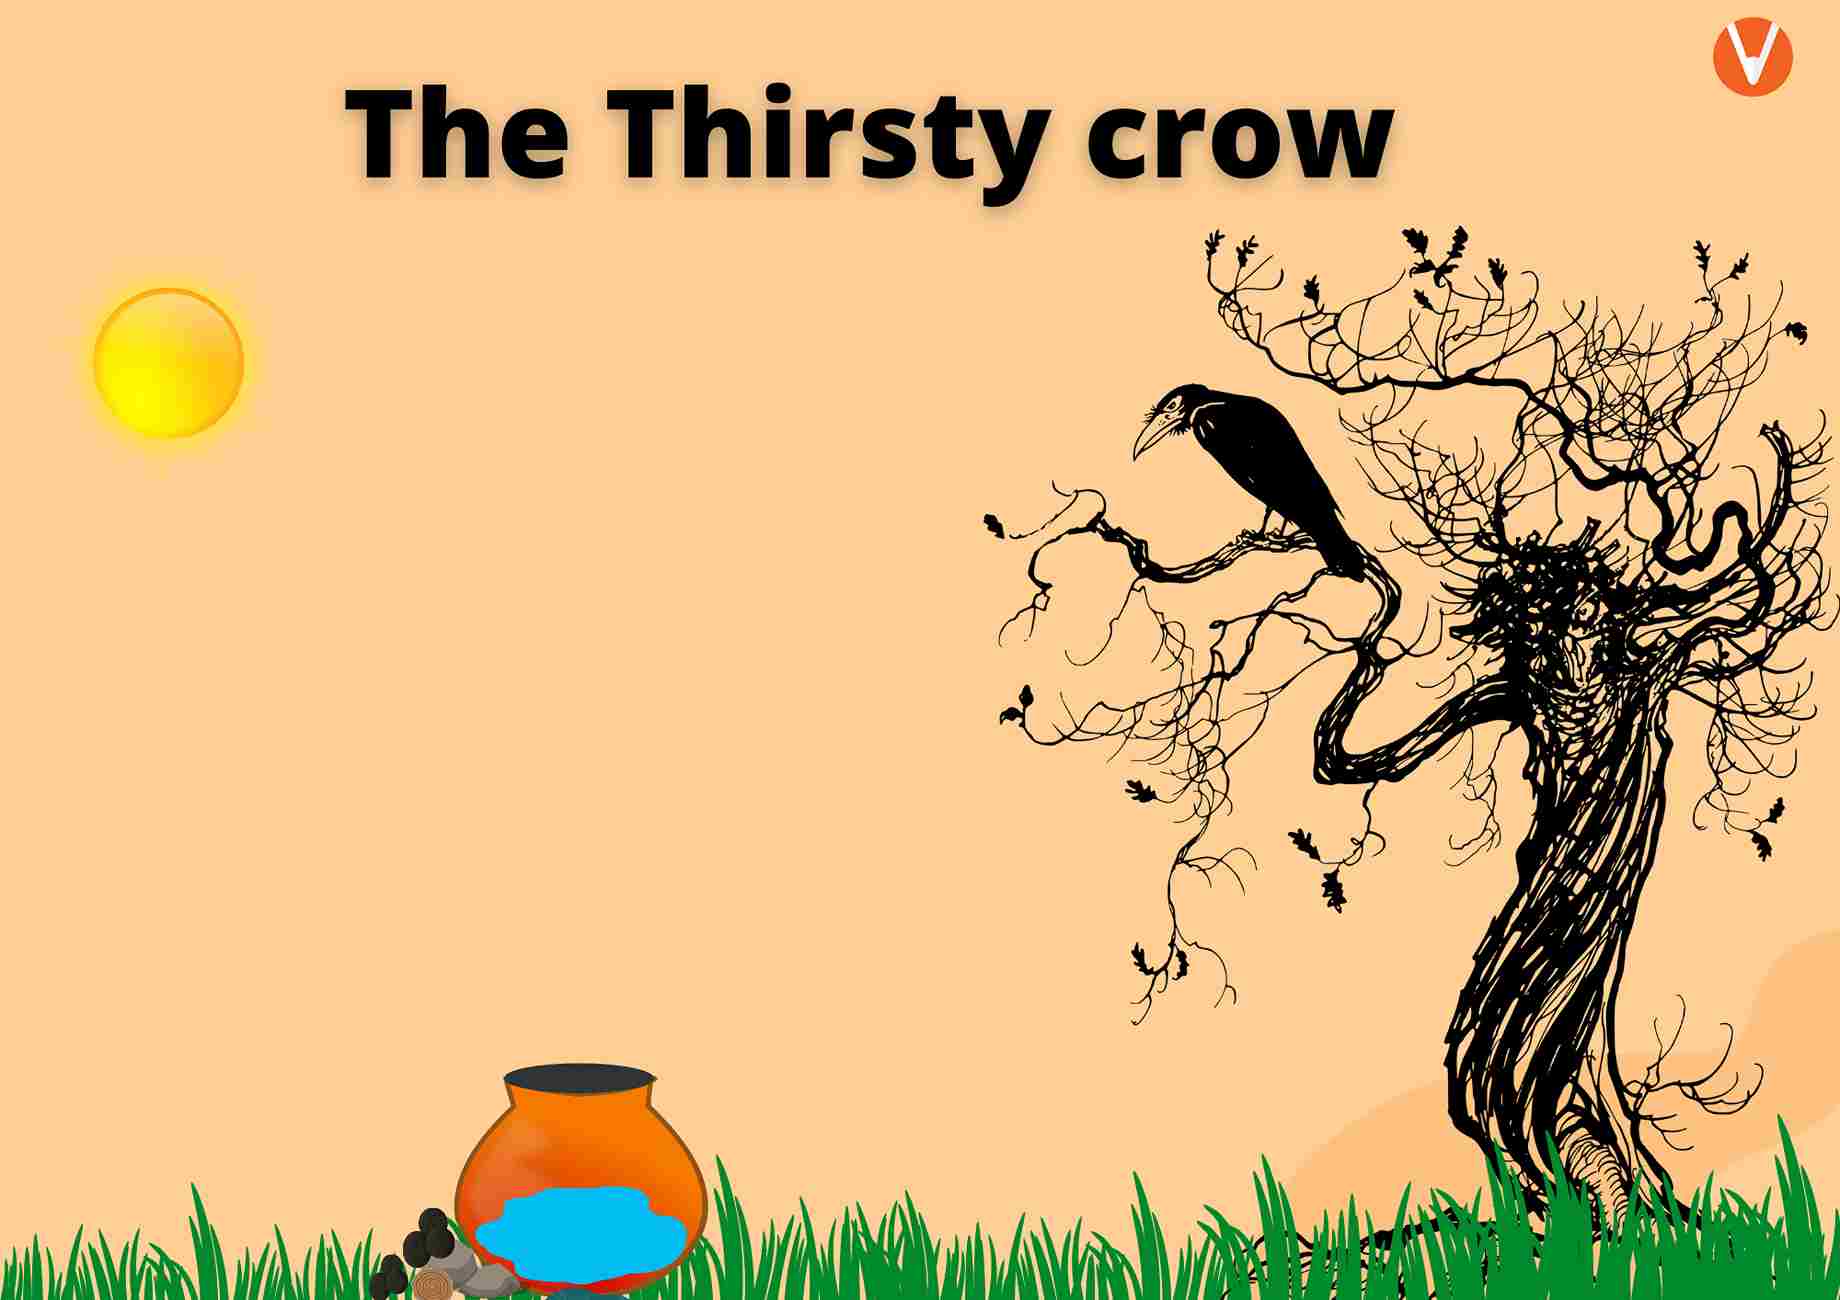 Image showing the thirsty crow sitting on a branch